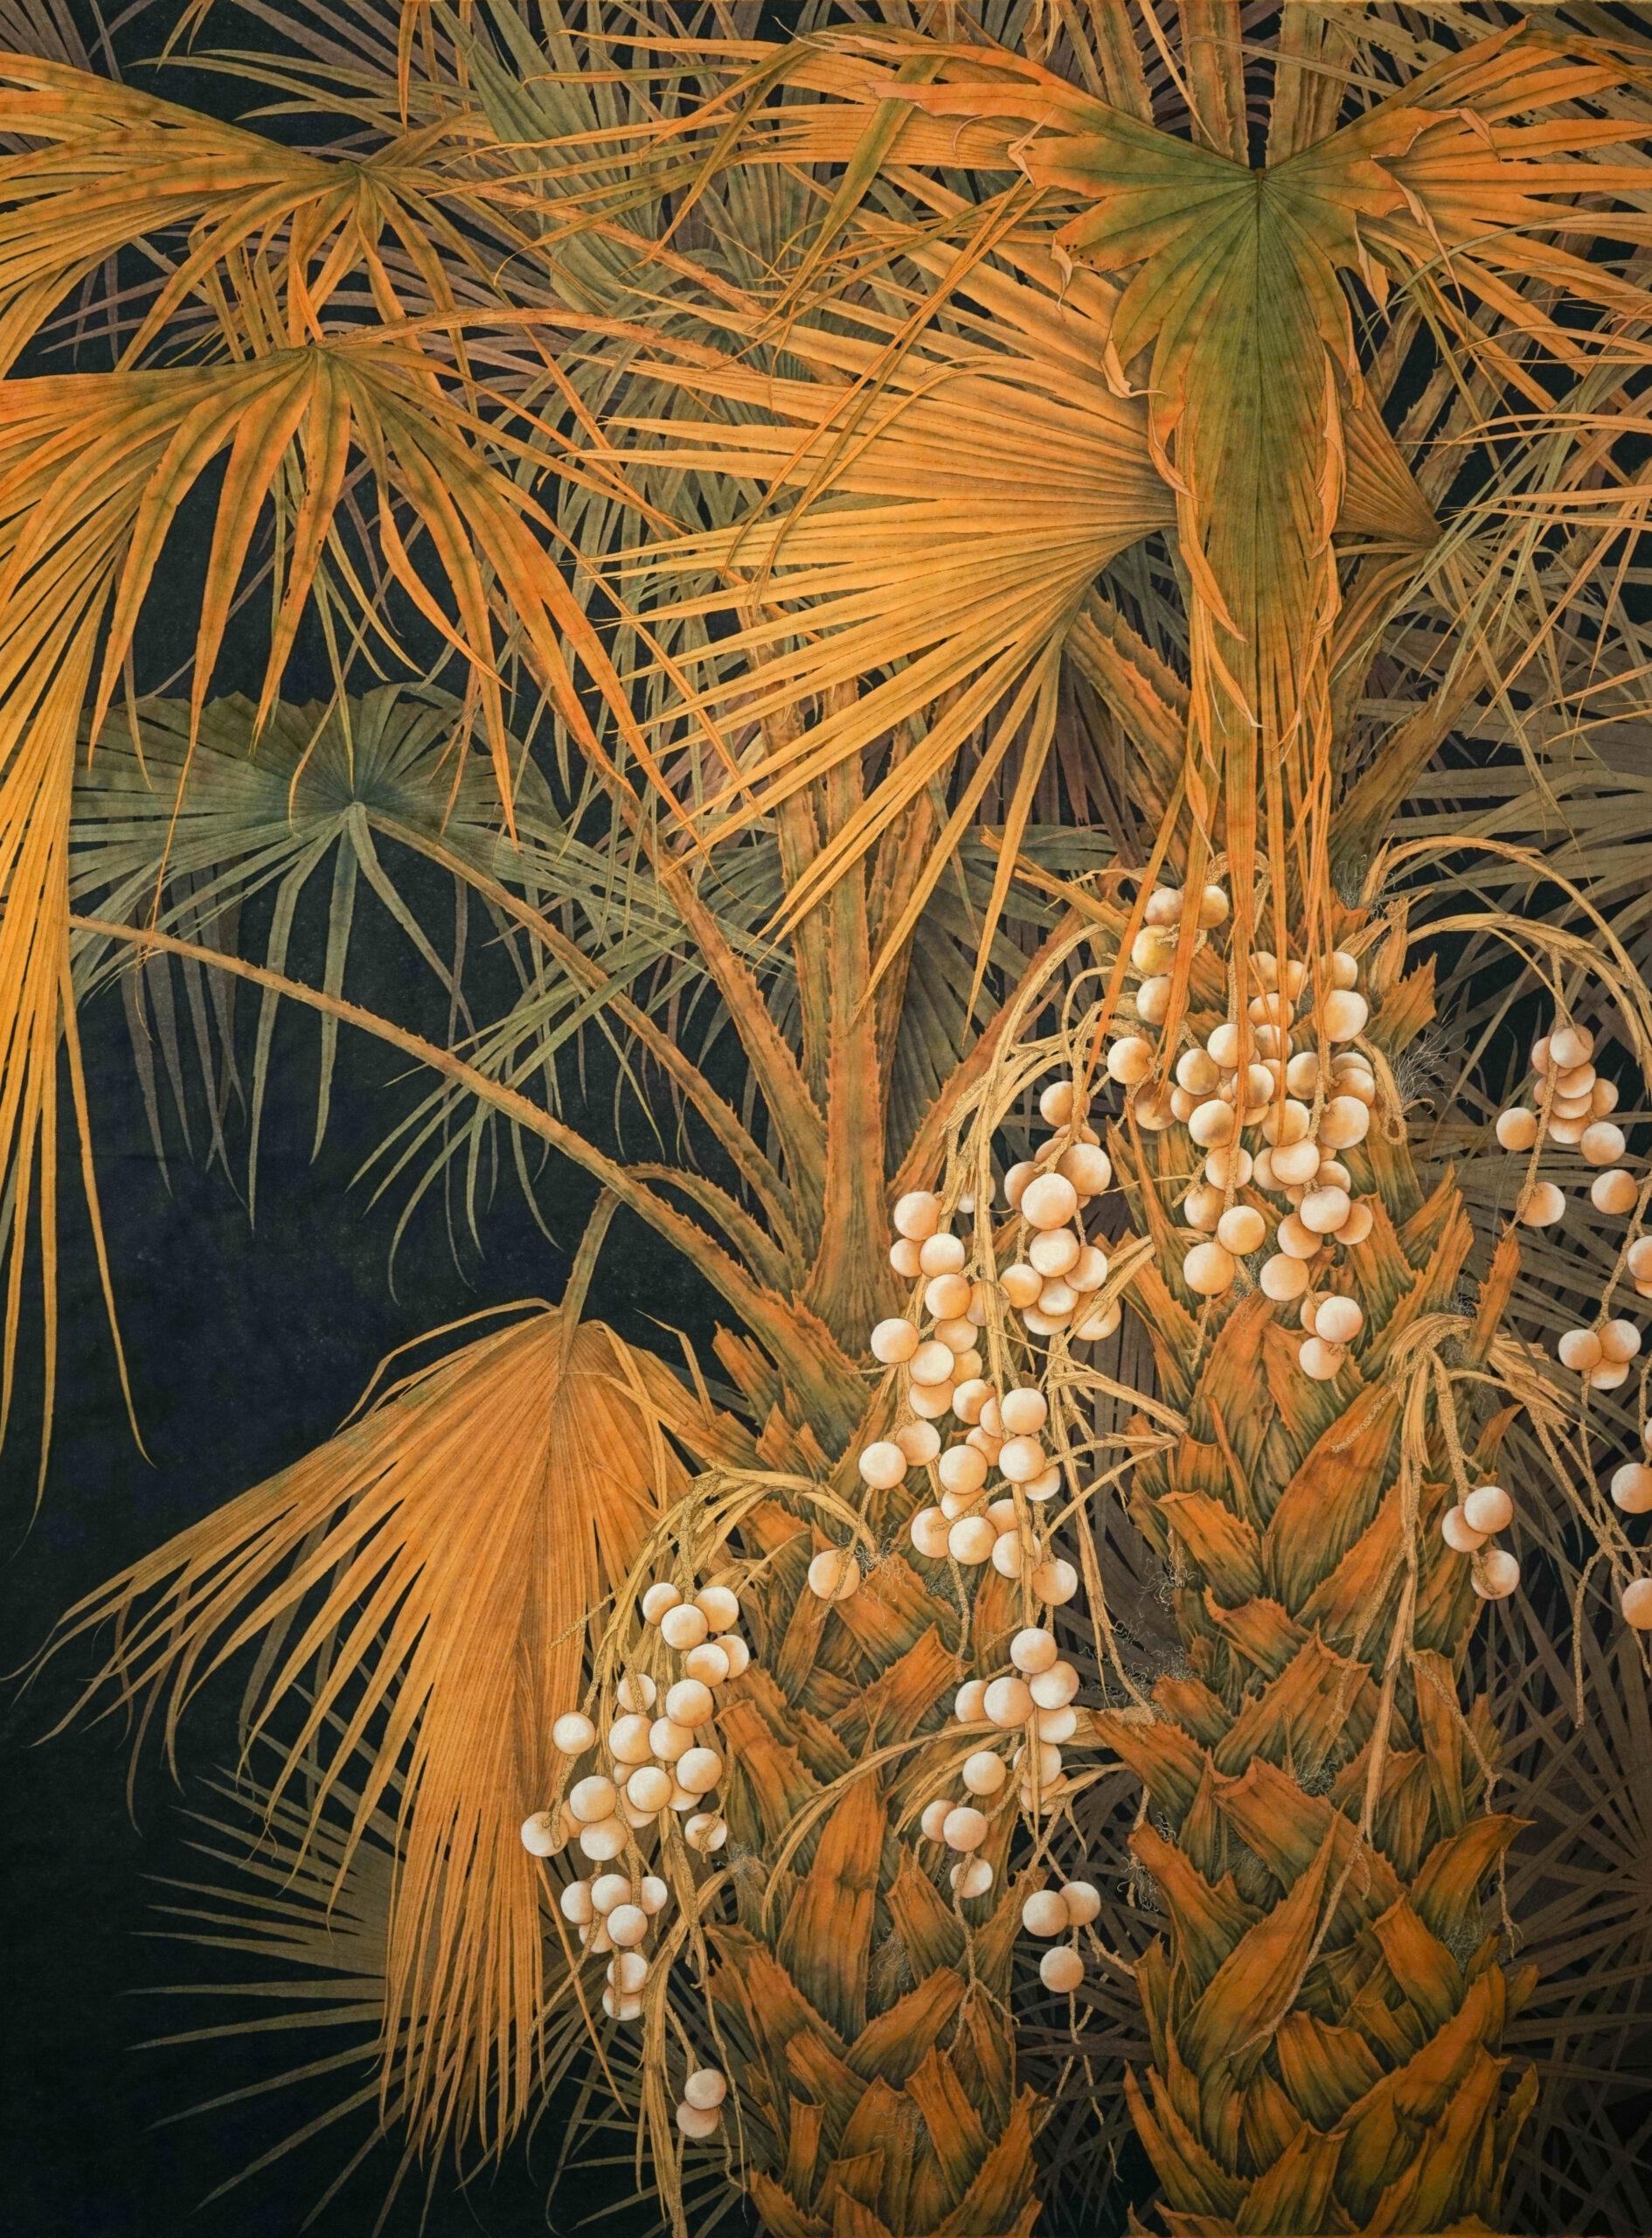 An ink painting of palm trees. The leaves and flowers are painted in high detail using contrasting colours and shades. The leaves are mostly golden yellow, fading to green receding into a blackish background. Around the trunk of the palm closest to us are small round, white flowers that stand out.